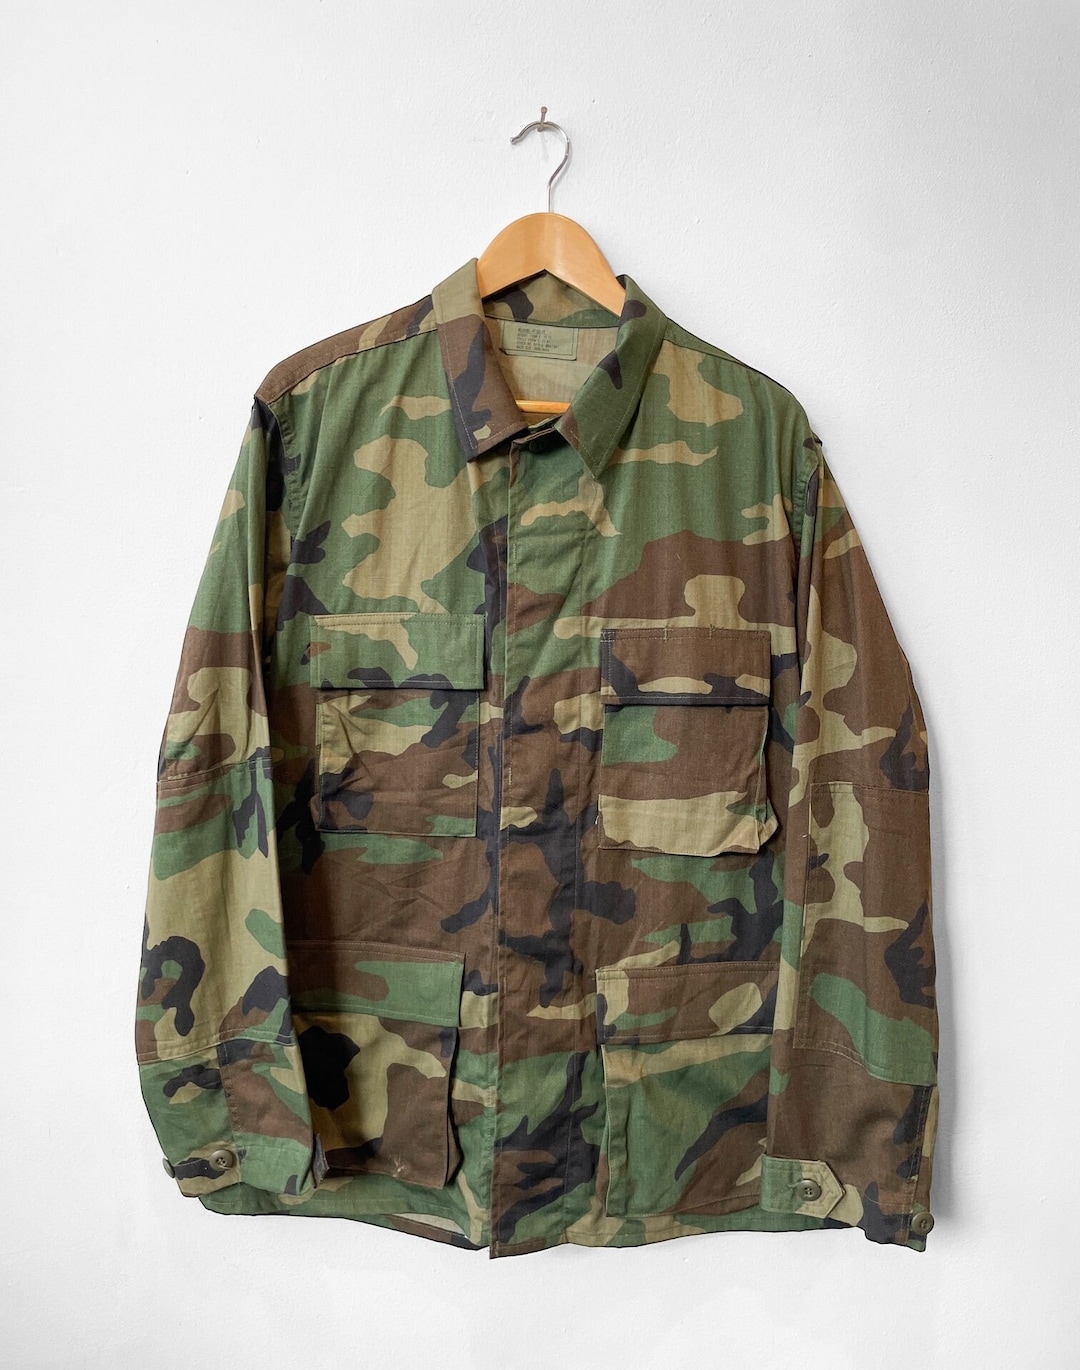 archive PPFM military jacket y2k グランジ 【人気商品